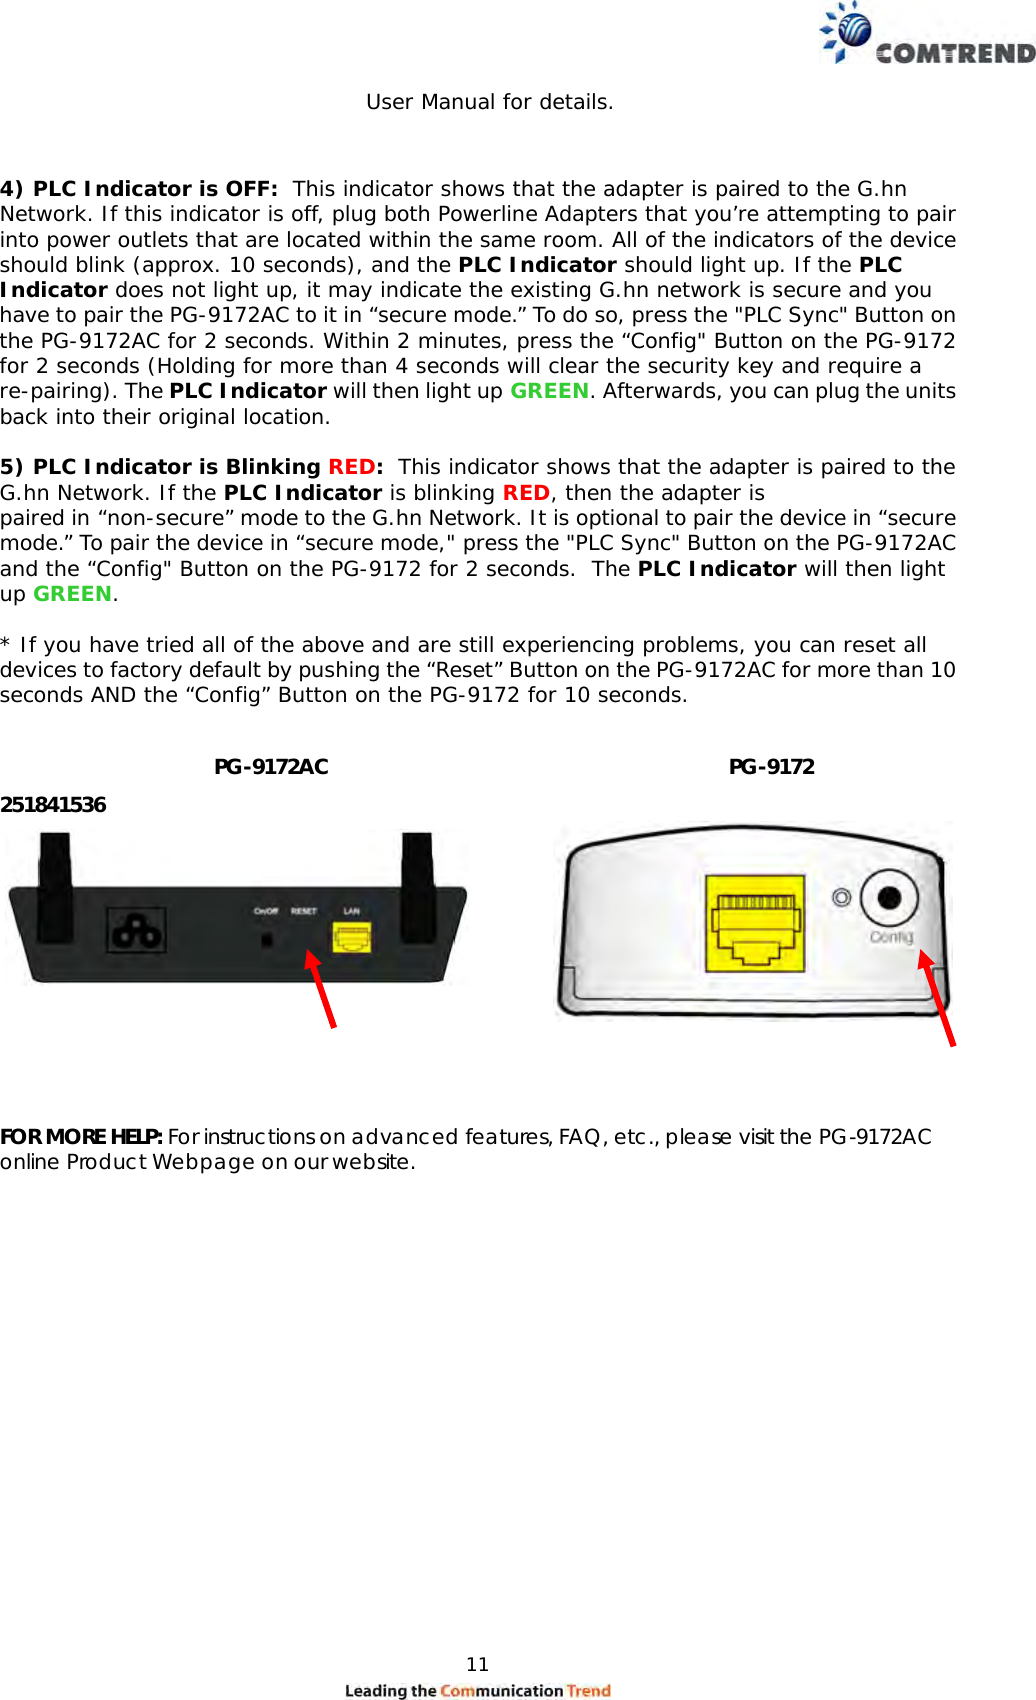  11                                                    User Manual for details.   4) PLC Indicator is OFF:  This indicator shows that the adapter is paired to the G.hn Network. If this indicator is off, plug both Powerline Adapters that you’re attempting to pair into power outlets that are located within the same room. All of the indicators of the device should blink (approx. 10 seconds), and the PLC Indicator should light up. If the PLC Indicator does not light up, it may indicate the existing G.hn network is secure and you have to pair the PG-9172AC to it in “secure mode.” To do so, press the &quot;PLC Sync&quot; Button on the PG-9172AC for 2 seconds. Within 2 minutes, press the “Config&quot; Button on the PG-9172 for 2 seconds (Holding for more than 4 seconds will clear the security key and require a re-pairing). The PLC Indicator will then light up GREEN. Afterwards, you can plug the units back into their original location.  5) PLC Indicator is Blinking RED:  This indicator shows that the adapter is paired to the G.hn Network. If the PLC Indicator is blinking RED, then the adapter is paired in “non-secure” mode to the G.hn Network. It is optional to pair the device in “secure mode.” To pair the device in “secure mode,&quot; press the &quot;PLC Sync&quot; Button on the PG-9172AC and the “Config&quot; Button on the PG-9172 for 2 seconds.  The PLC Indicator will then light up GREEN.  * If you have tried all of the above and are still experiencing problems, you can reset all devices to factory default by pushing the “Reset” Button on the PG-9172AC for more than 10 seconds AND the “Config” Button on the PG-9172 for 10 seconds.     251841536      FOR MORE HELP: For instructions on advanced features, FAQ, etc., please visit the PG-9172AC online Product Webpage on our website.             PG-9172AC  PG-9172 